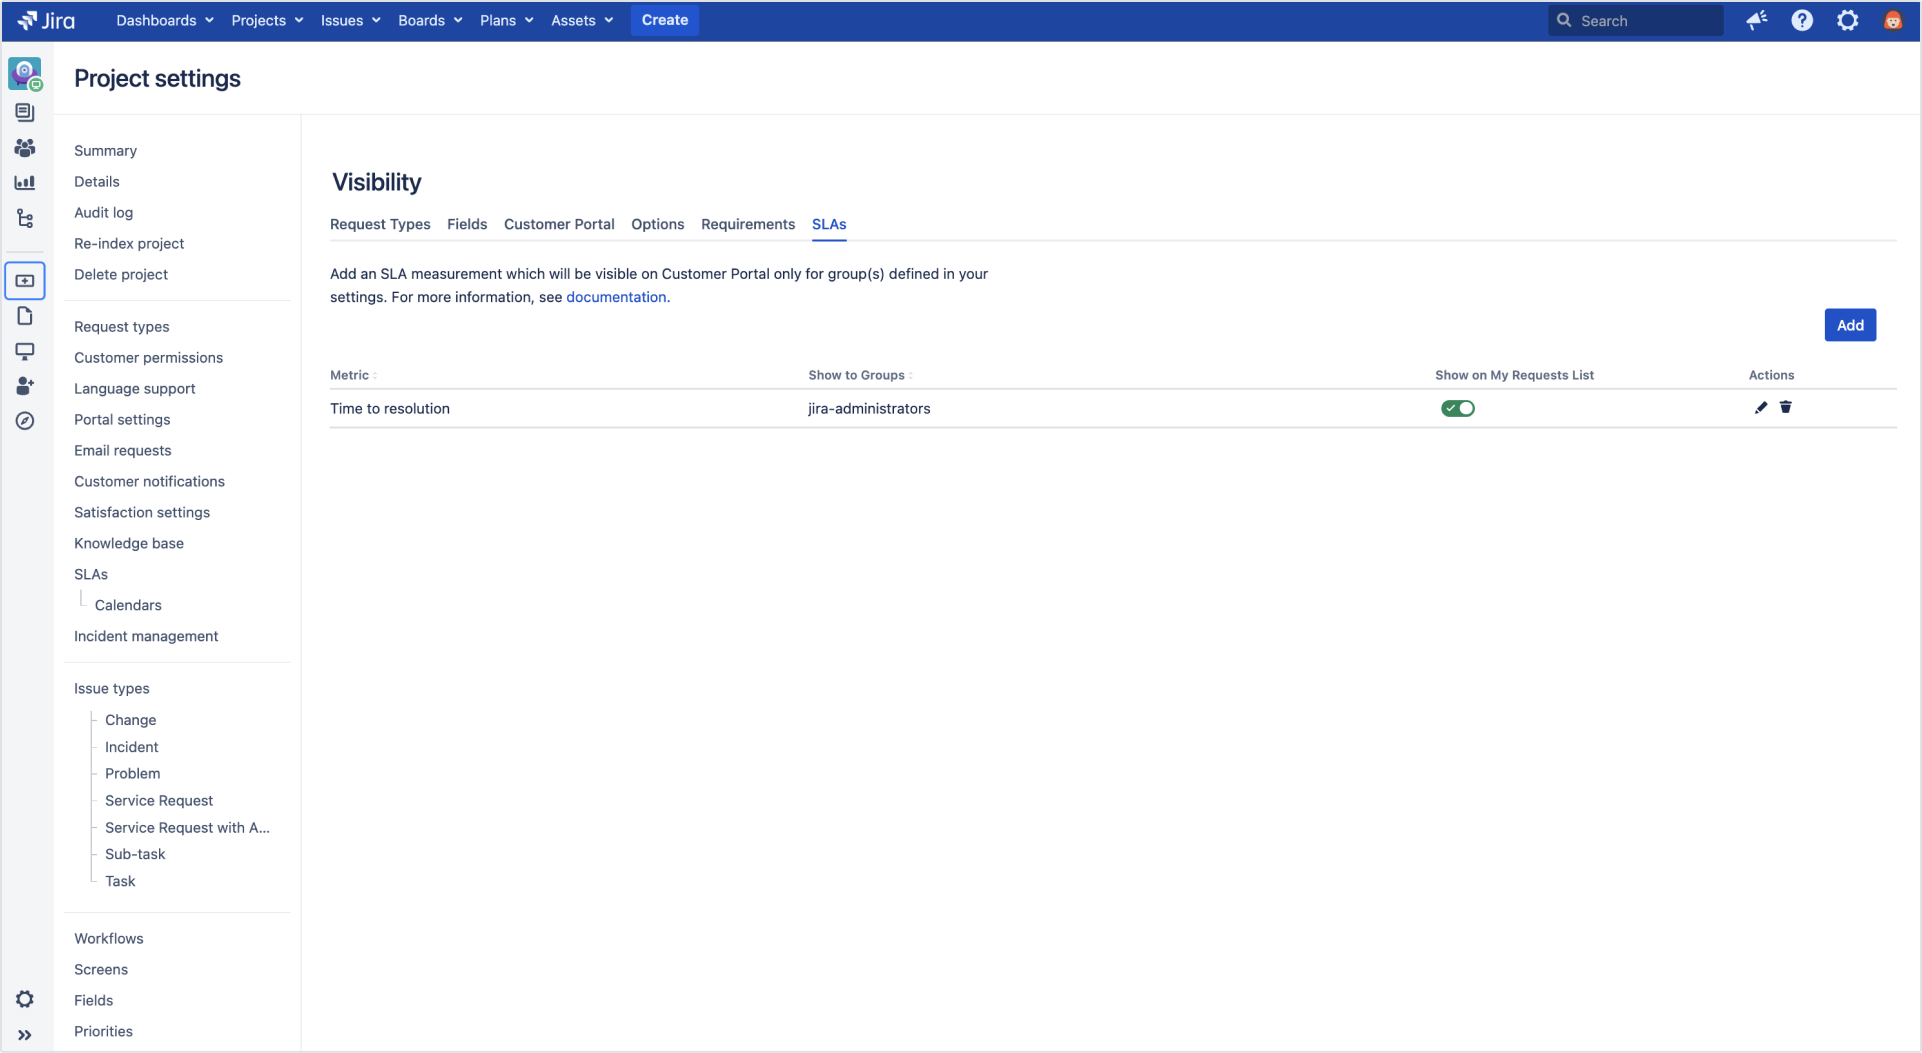 Configured SLAs visibility with Extension for Jira Service Management on My Requests List on the Customer Portal by adding a configuration to the list